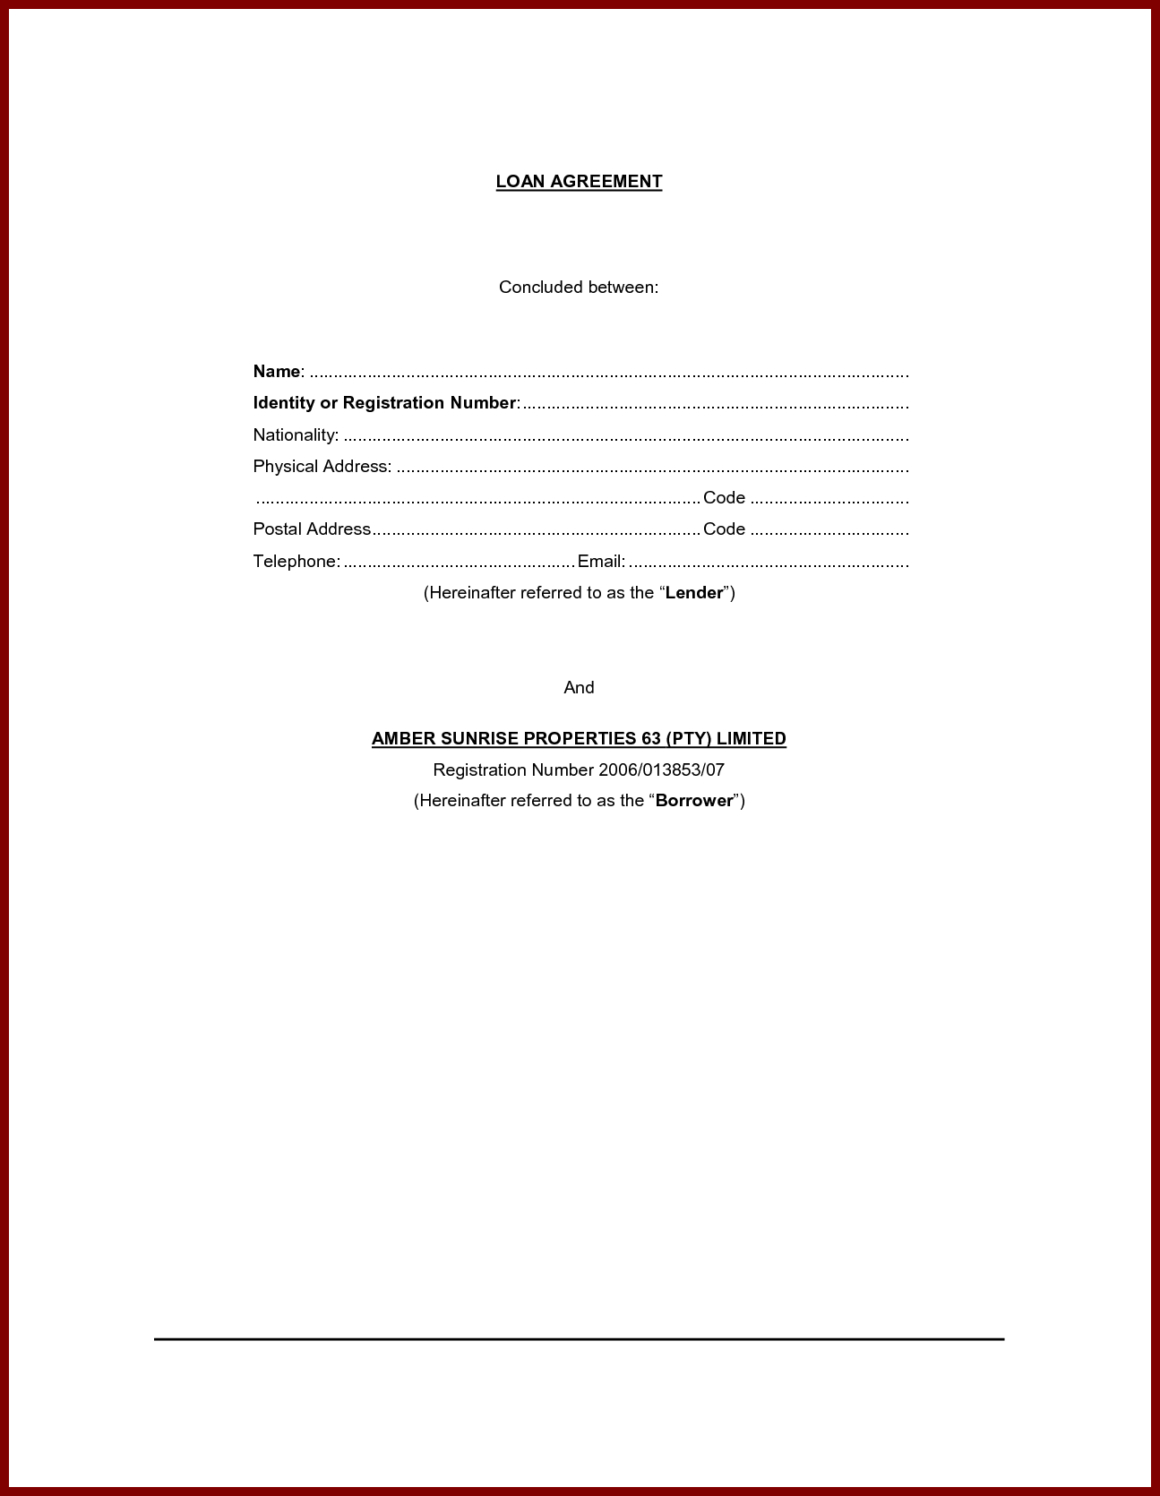 Personal Loan Contract Or Agreement Form Sample : Vientazona Intended For Blank Loan Agreement Template